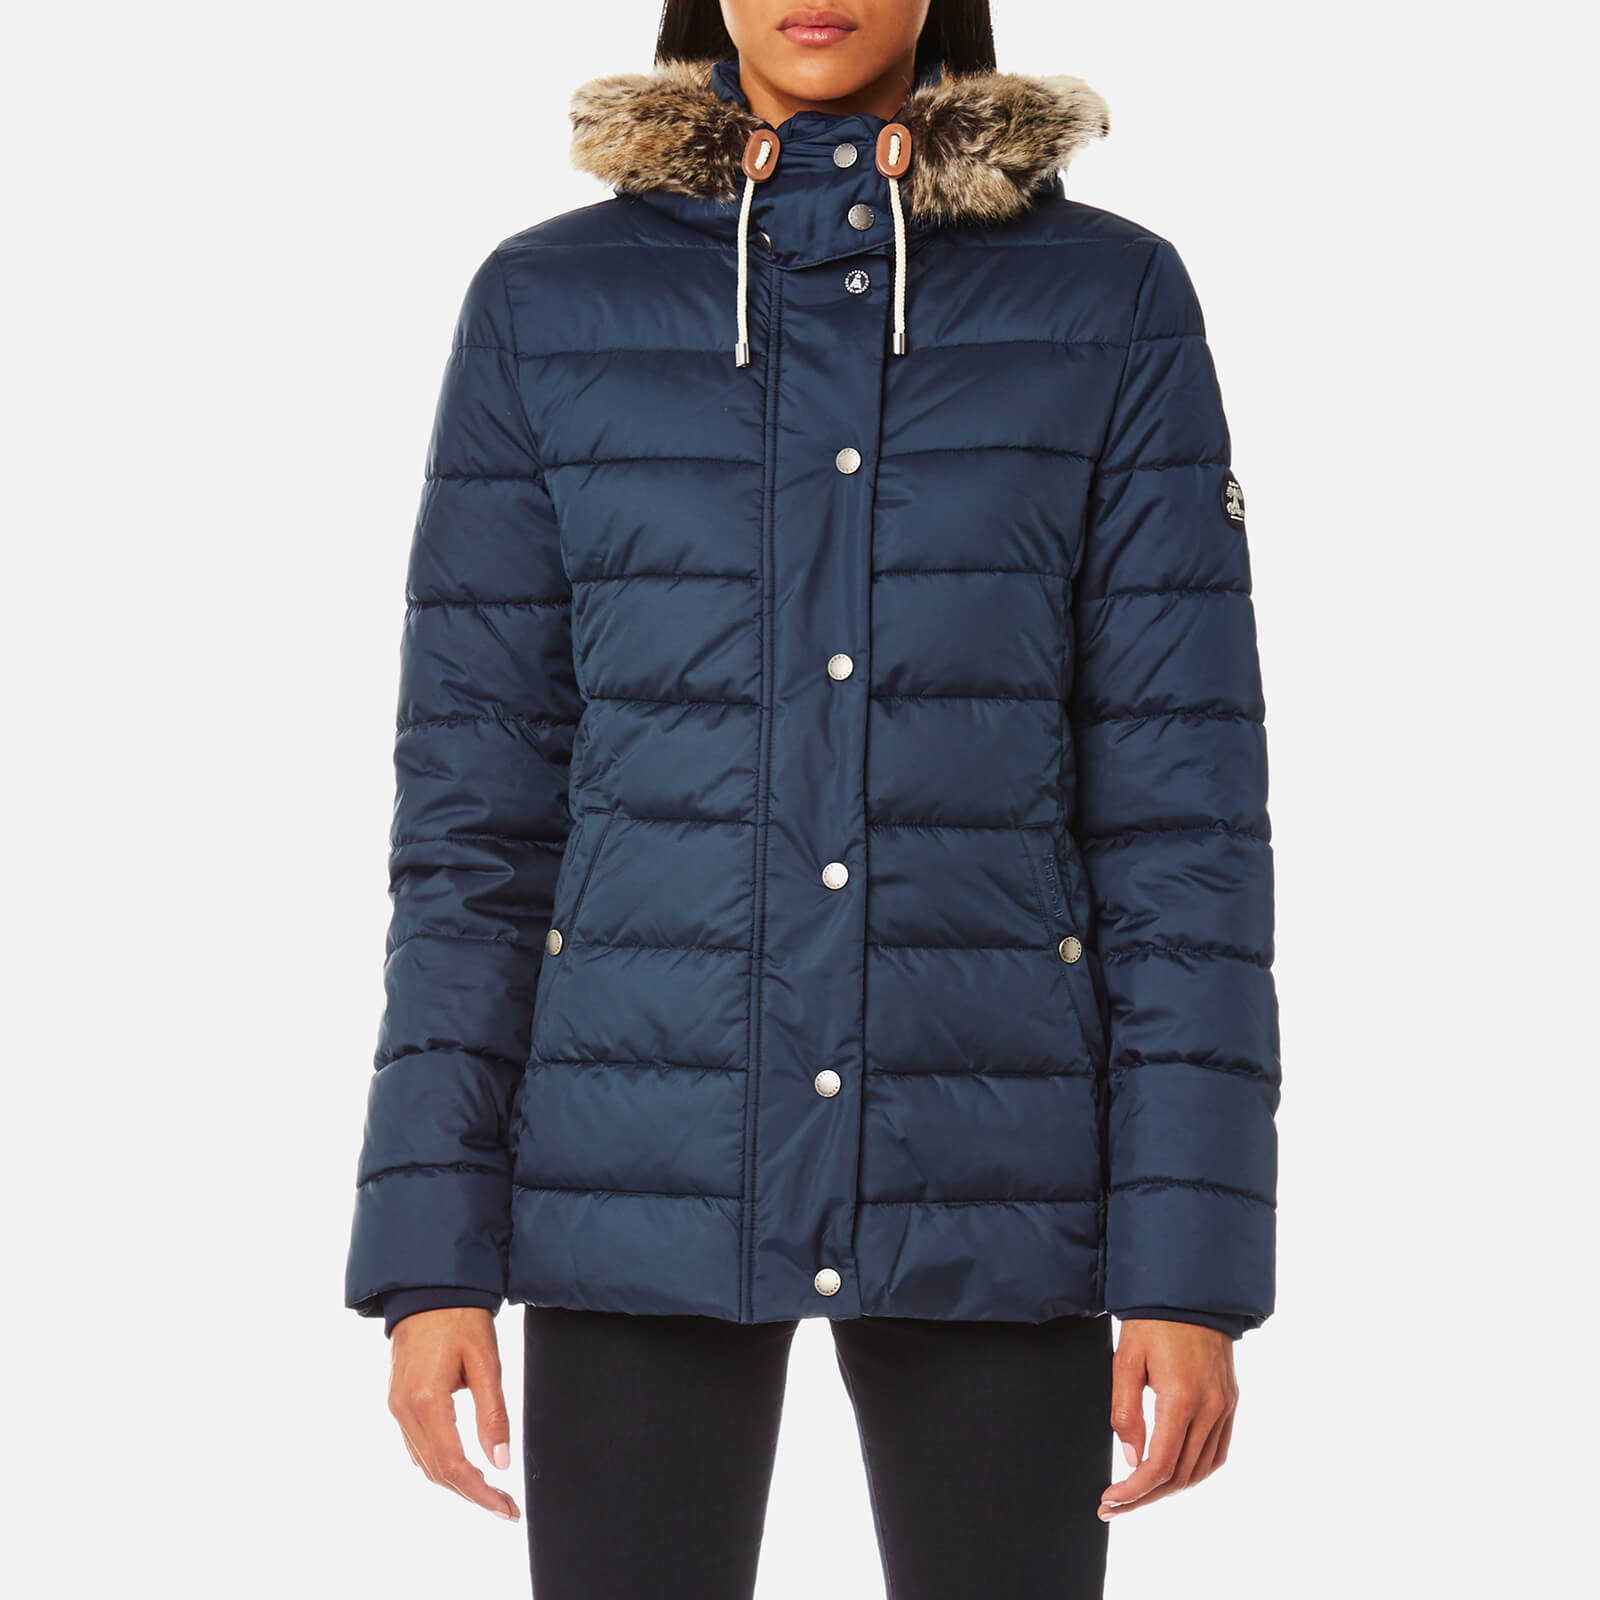 barbour shipper quilted jacket navy